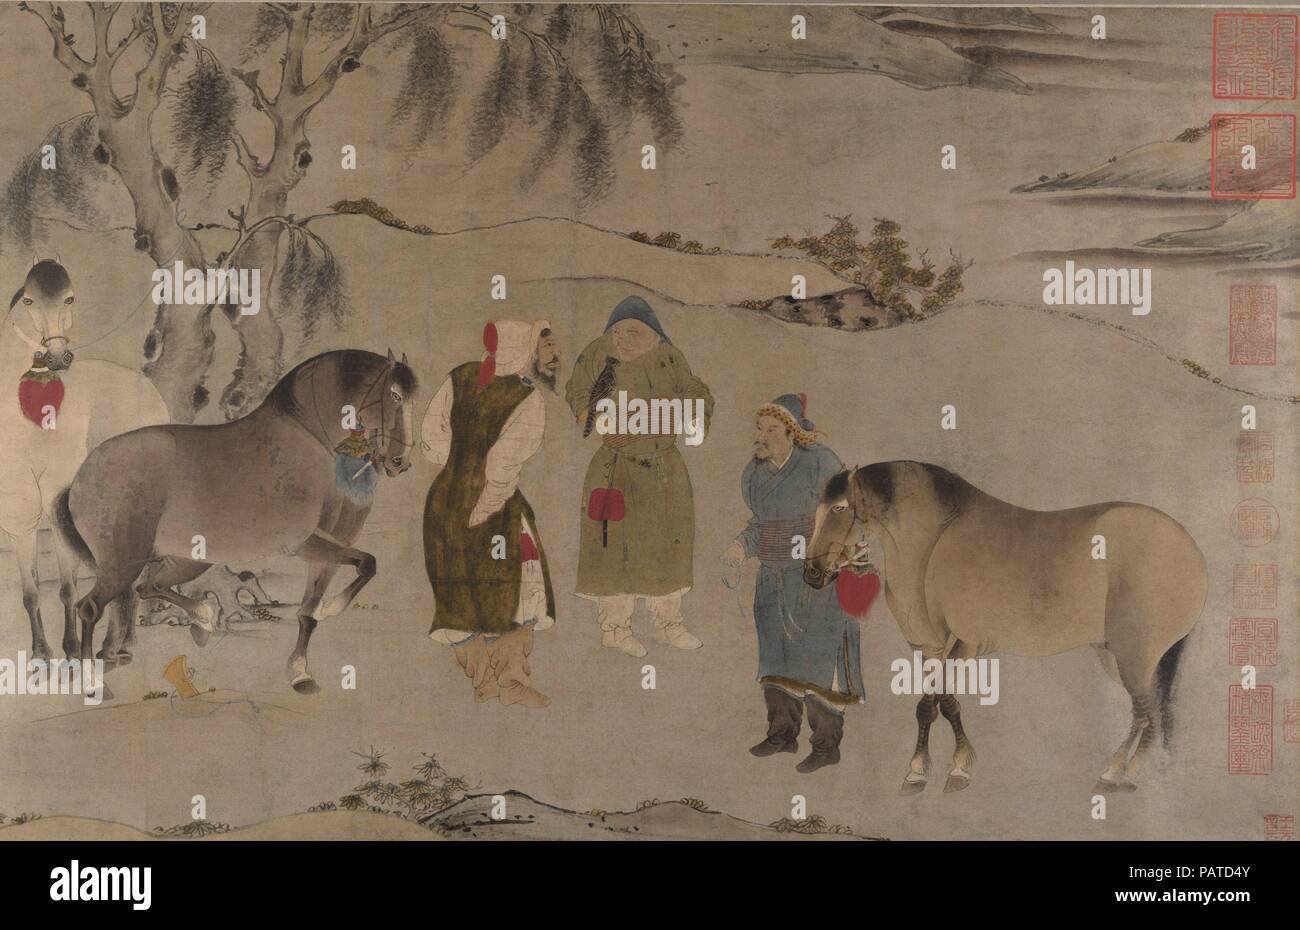 Six Horses. Artist: Unidentified Artists Chinese, 13th c. (1st half scroll); 14th c. (2nd half). Culture: China. Dimensions: Image: 18 3/16 x 66 1/4 in. (46.2 x 168.3 cm)  Overall with mounting: 18 9/16 x 254 3/4 in. (47.1 x 647.1 cm). Date: 13th-14th century.  The disparities in paper, pigment, and style between the two halves of this painting make it clear that they are by different hands and from different periods. In the first half of the painting, the horses and figures are well drawn and there is a rough vigor in the depiction of the landscape and trees. The shading of the land forms and Stock Photo